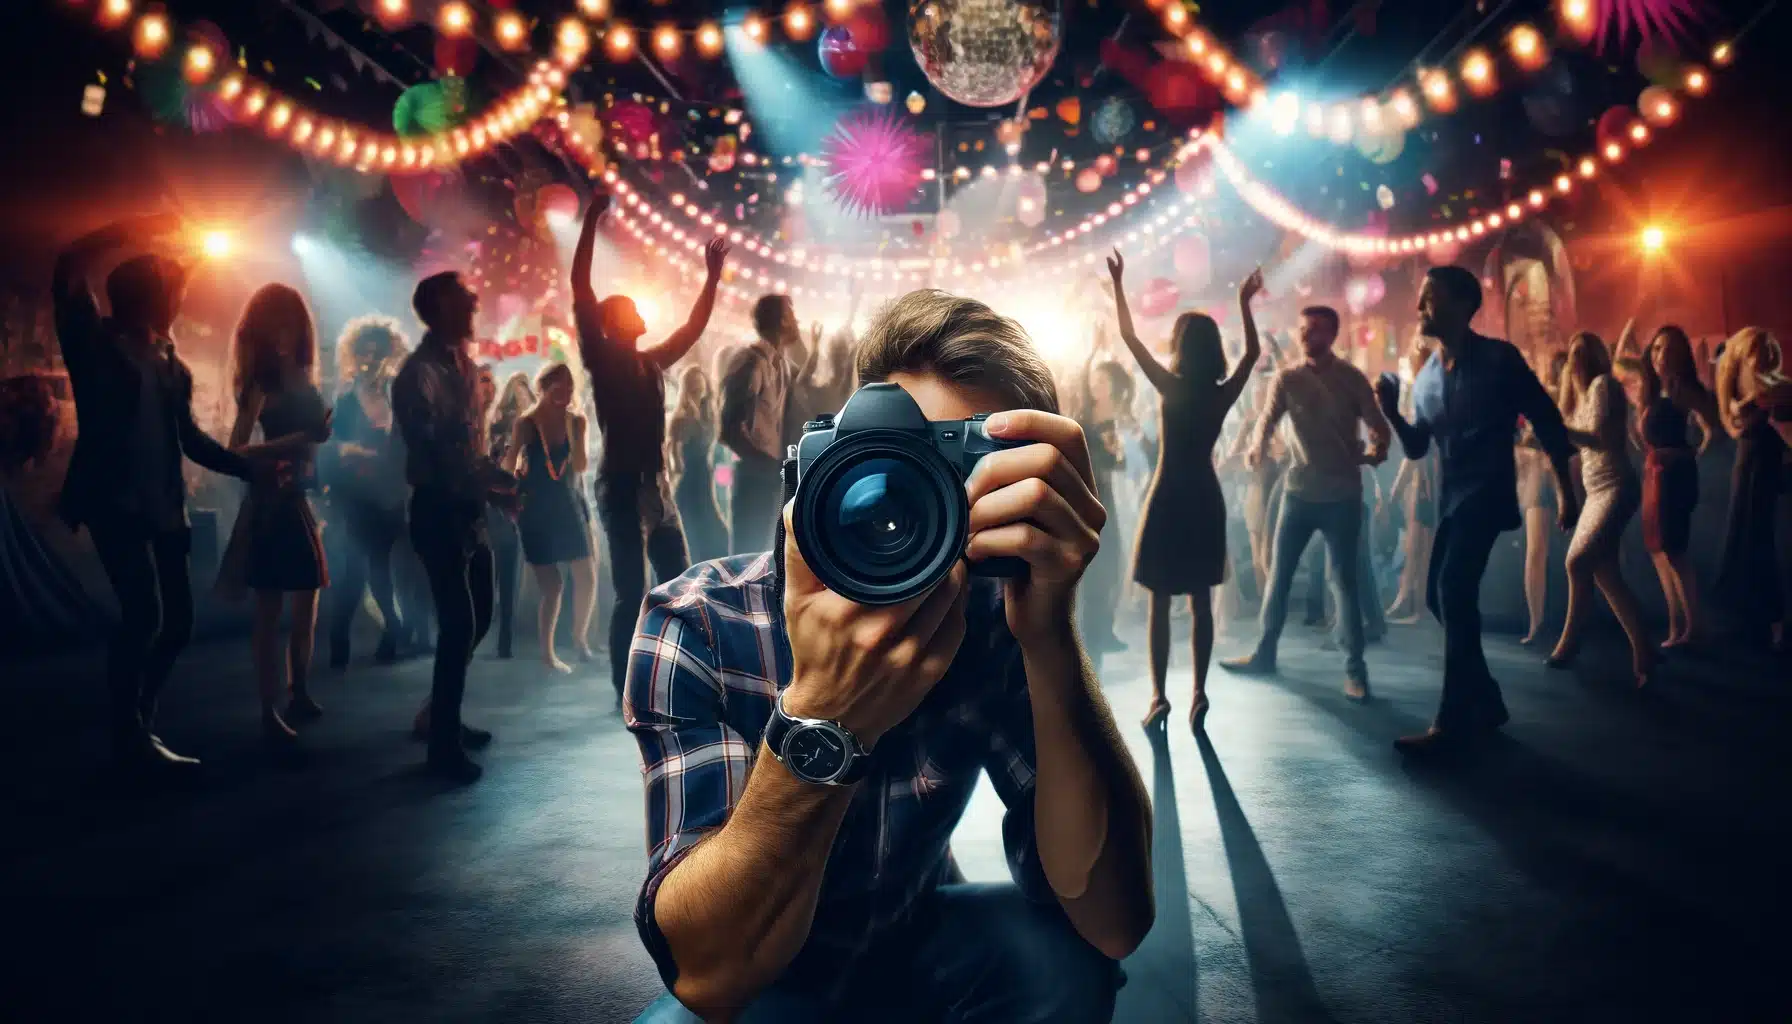 Photographer taking a self-portrait at a vibrant night party, surrounded by joyous partygoers under colorful lights.